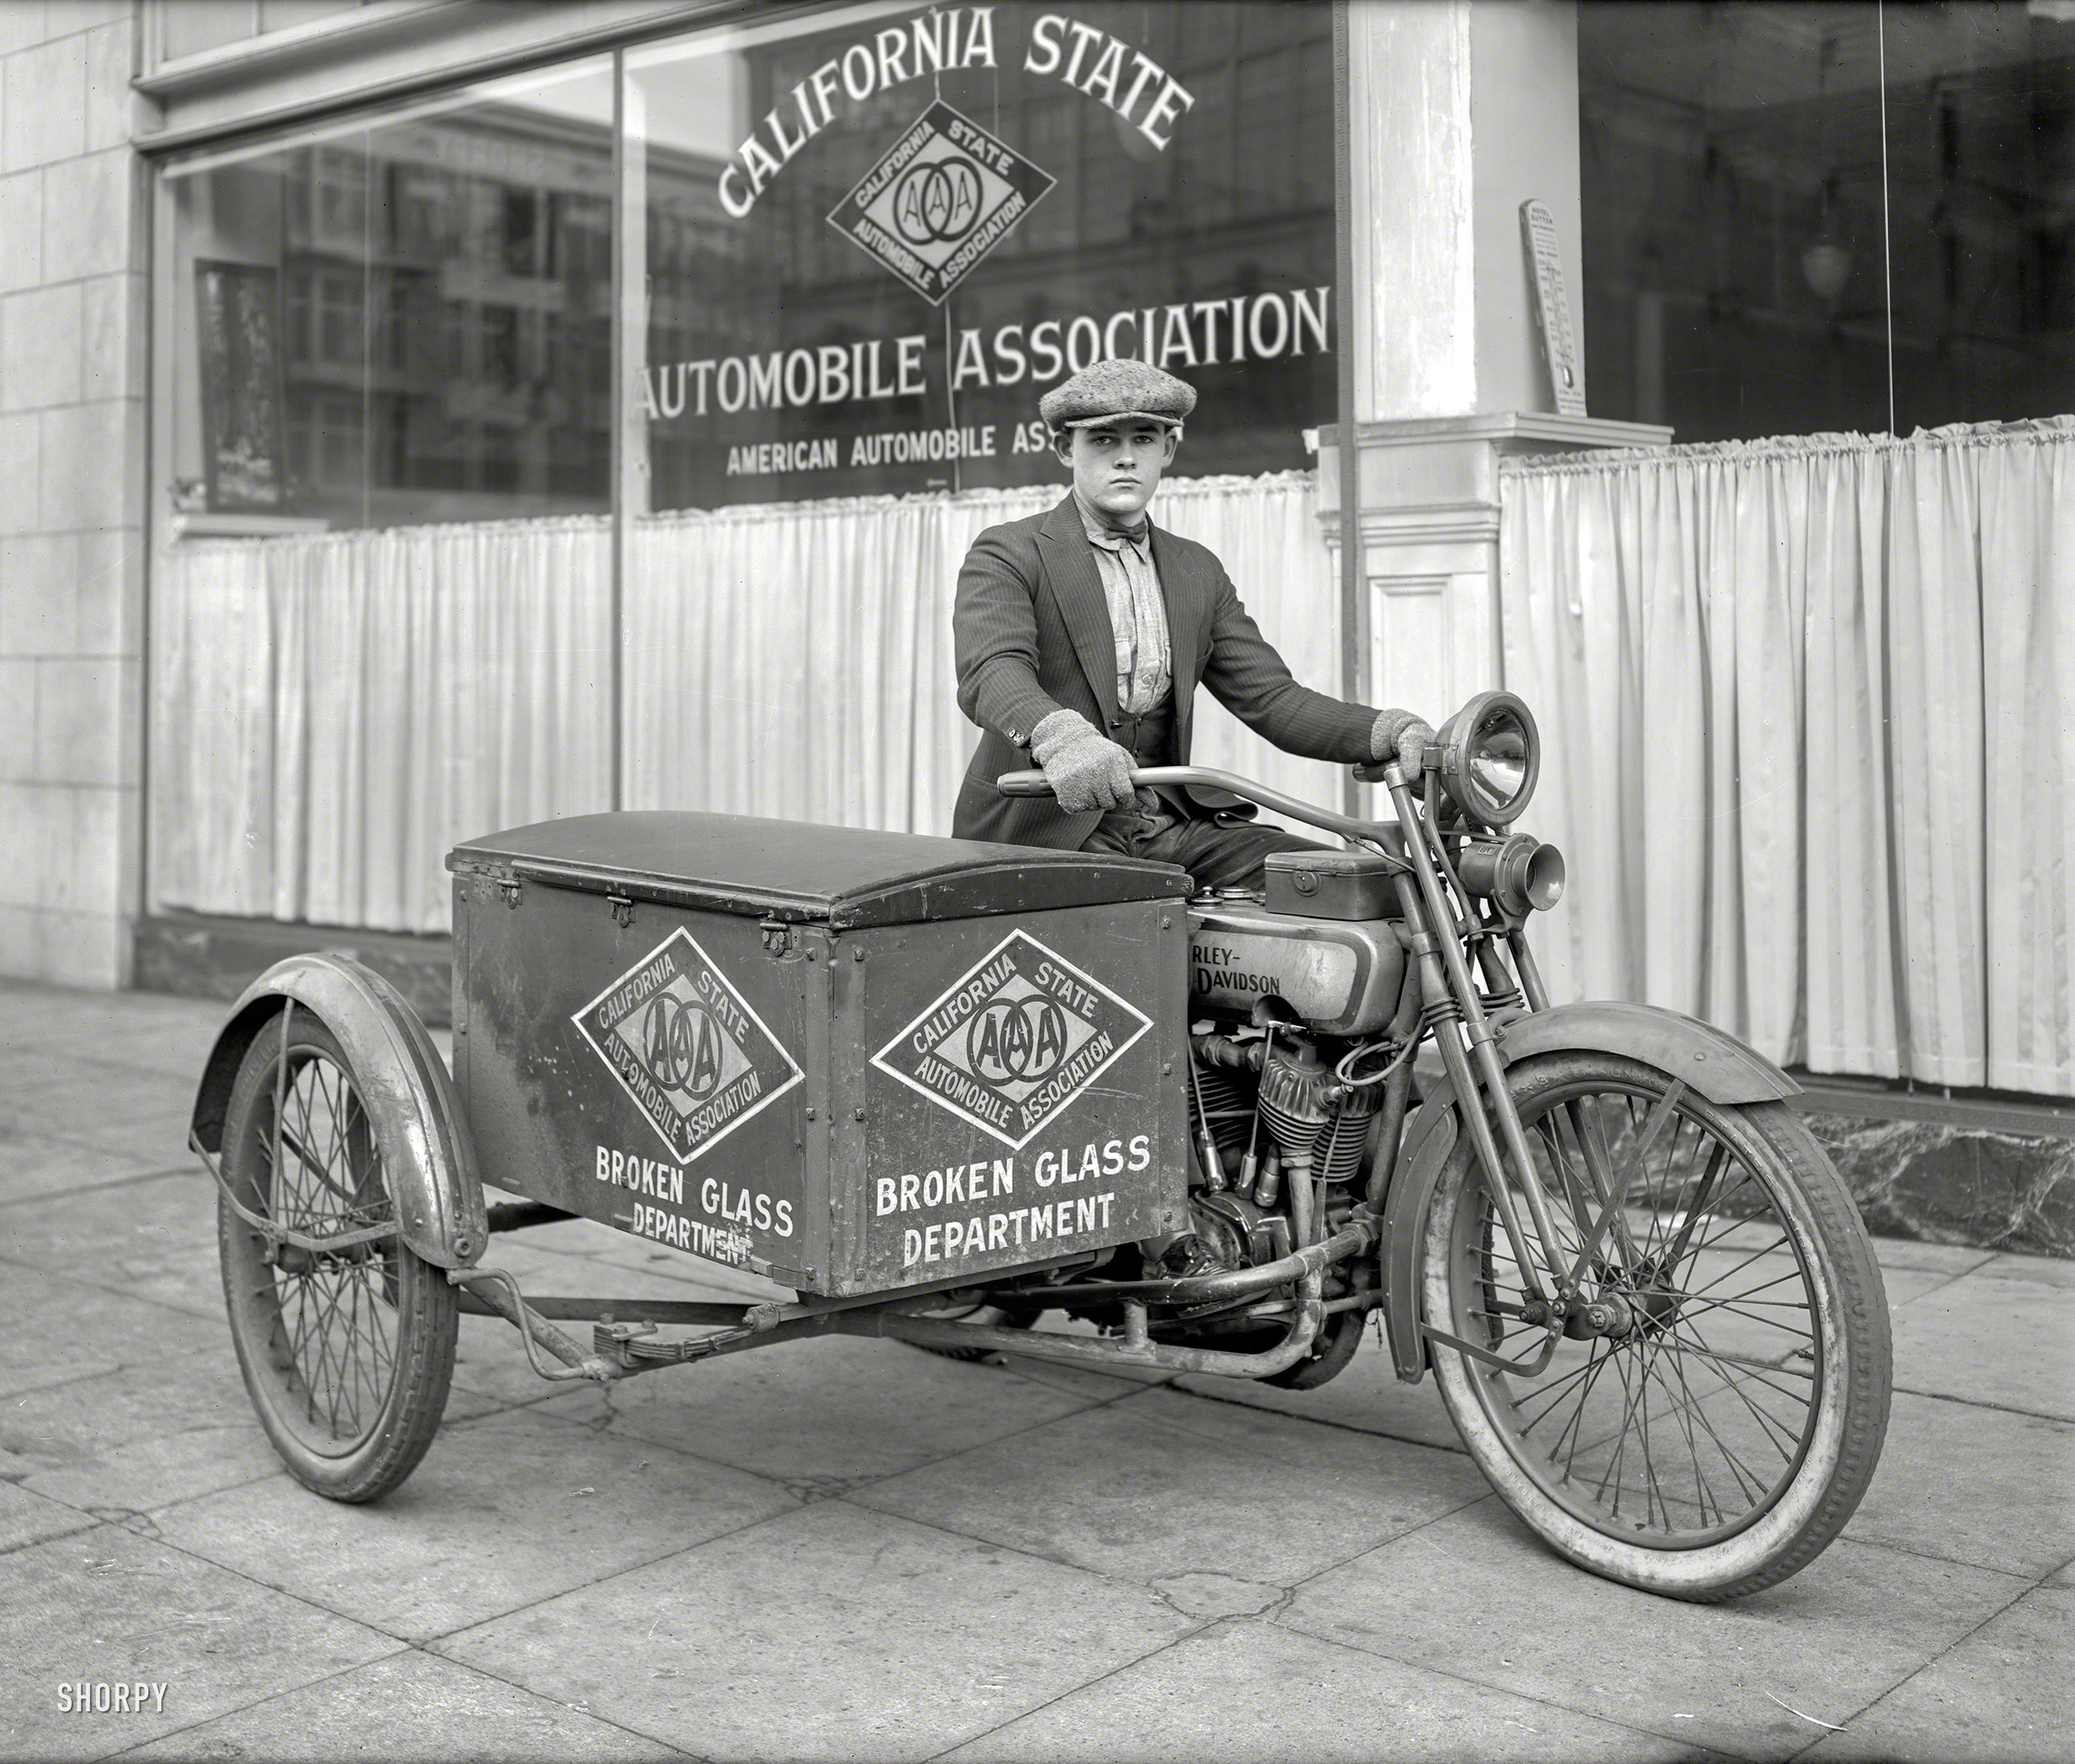 &nbsp; &nbsp; Young Tom started out in Nails & Tacks and worked his way up.
San Francisco ca. 1920s. "Young man on Harley-Davidson motorcycle -- California State Automobile Association 'Broken Glass Department' patrol." 6.5x8.5 glass negative originally from the Wyland Stanley collection. View full size.